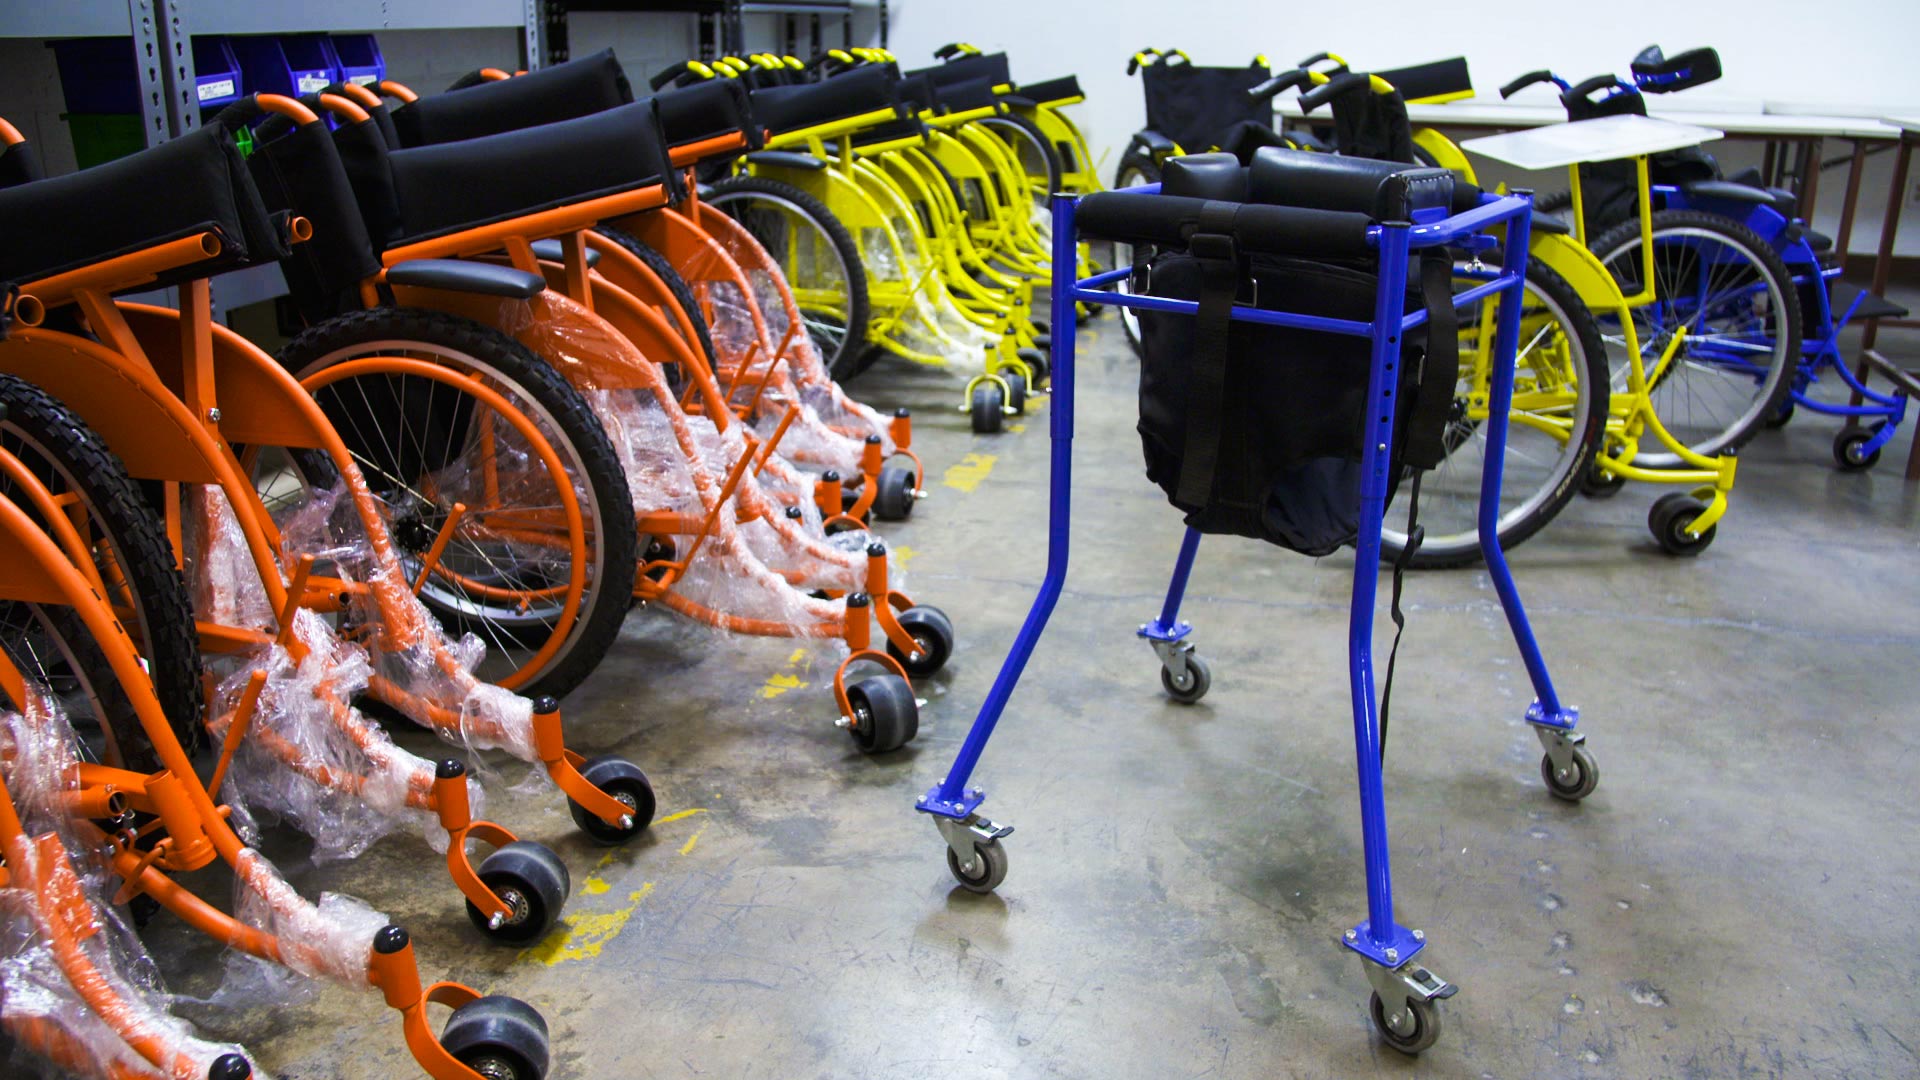 Customized wheelchairs made in Nogales, Sonora by the nonprofit organization, ARSOBO.